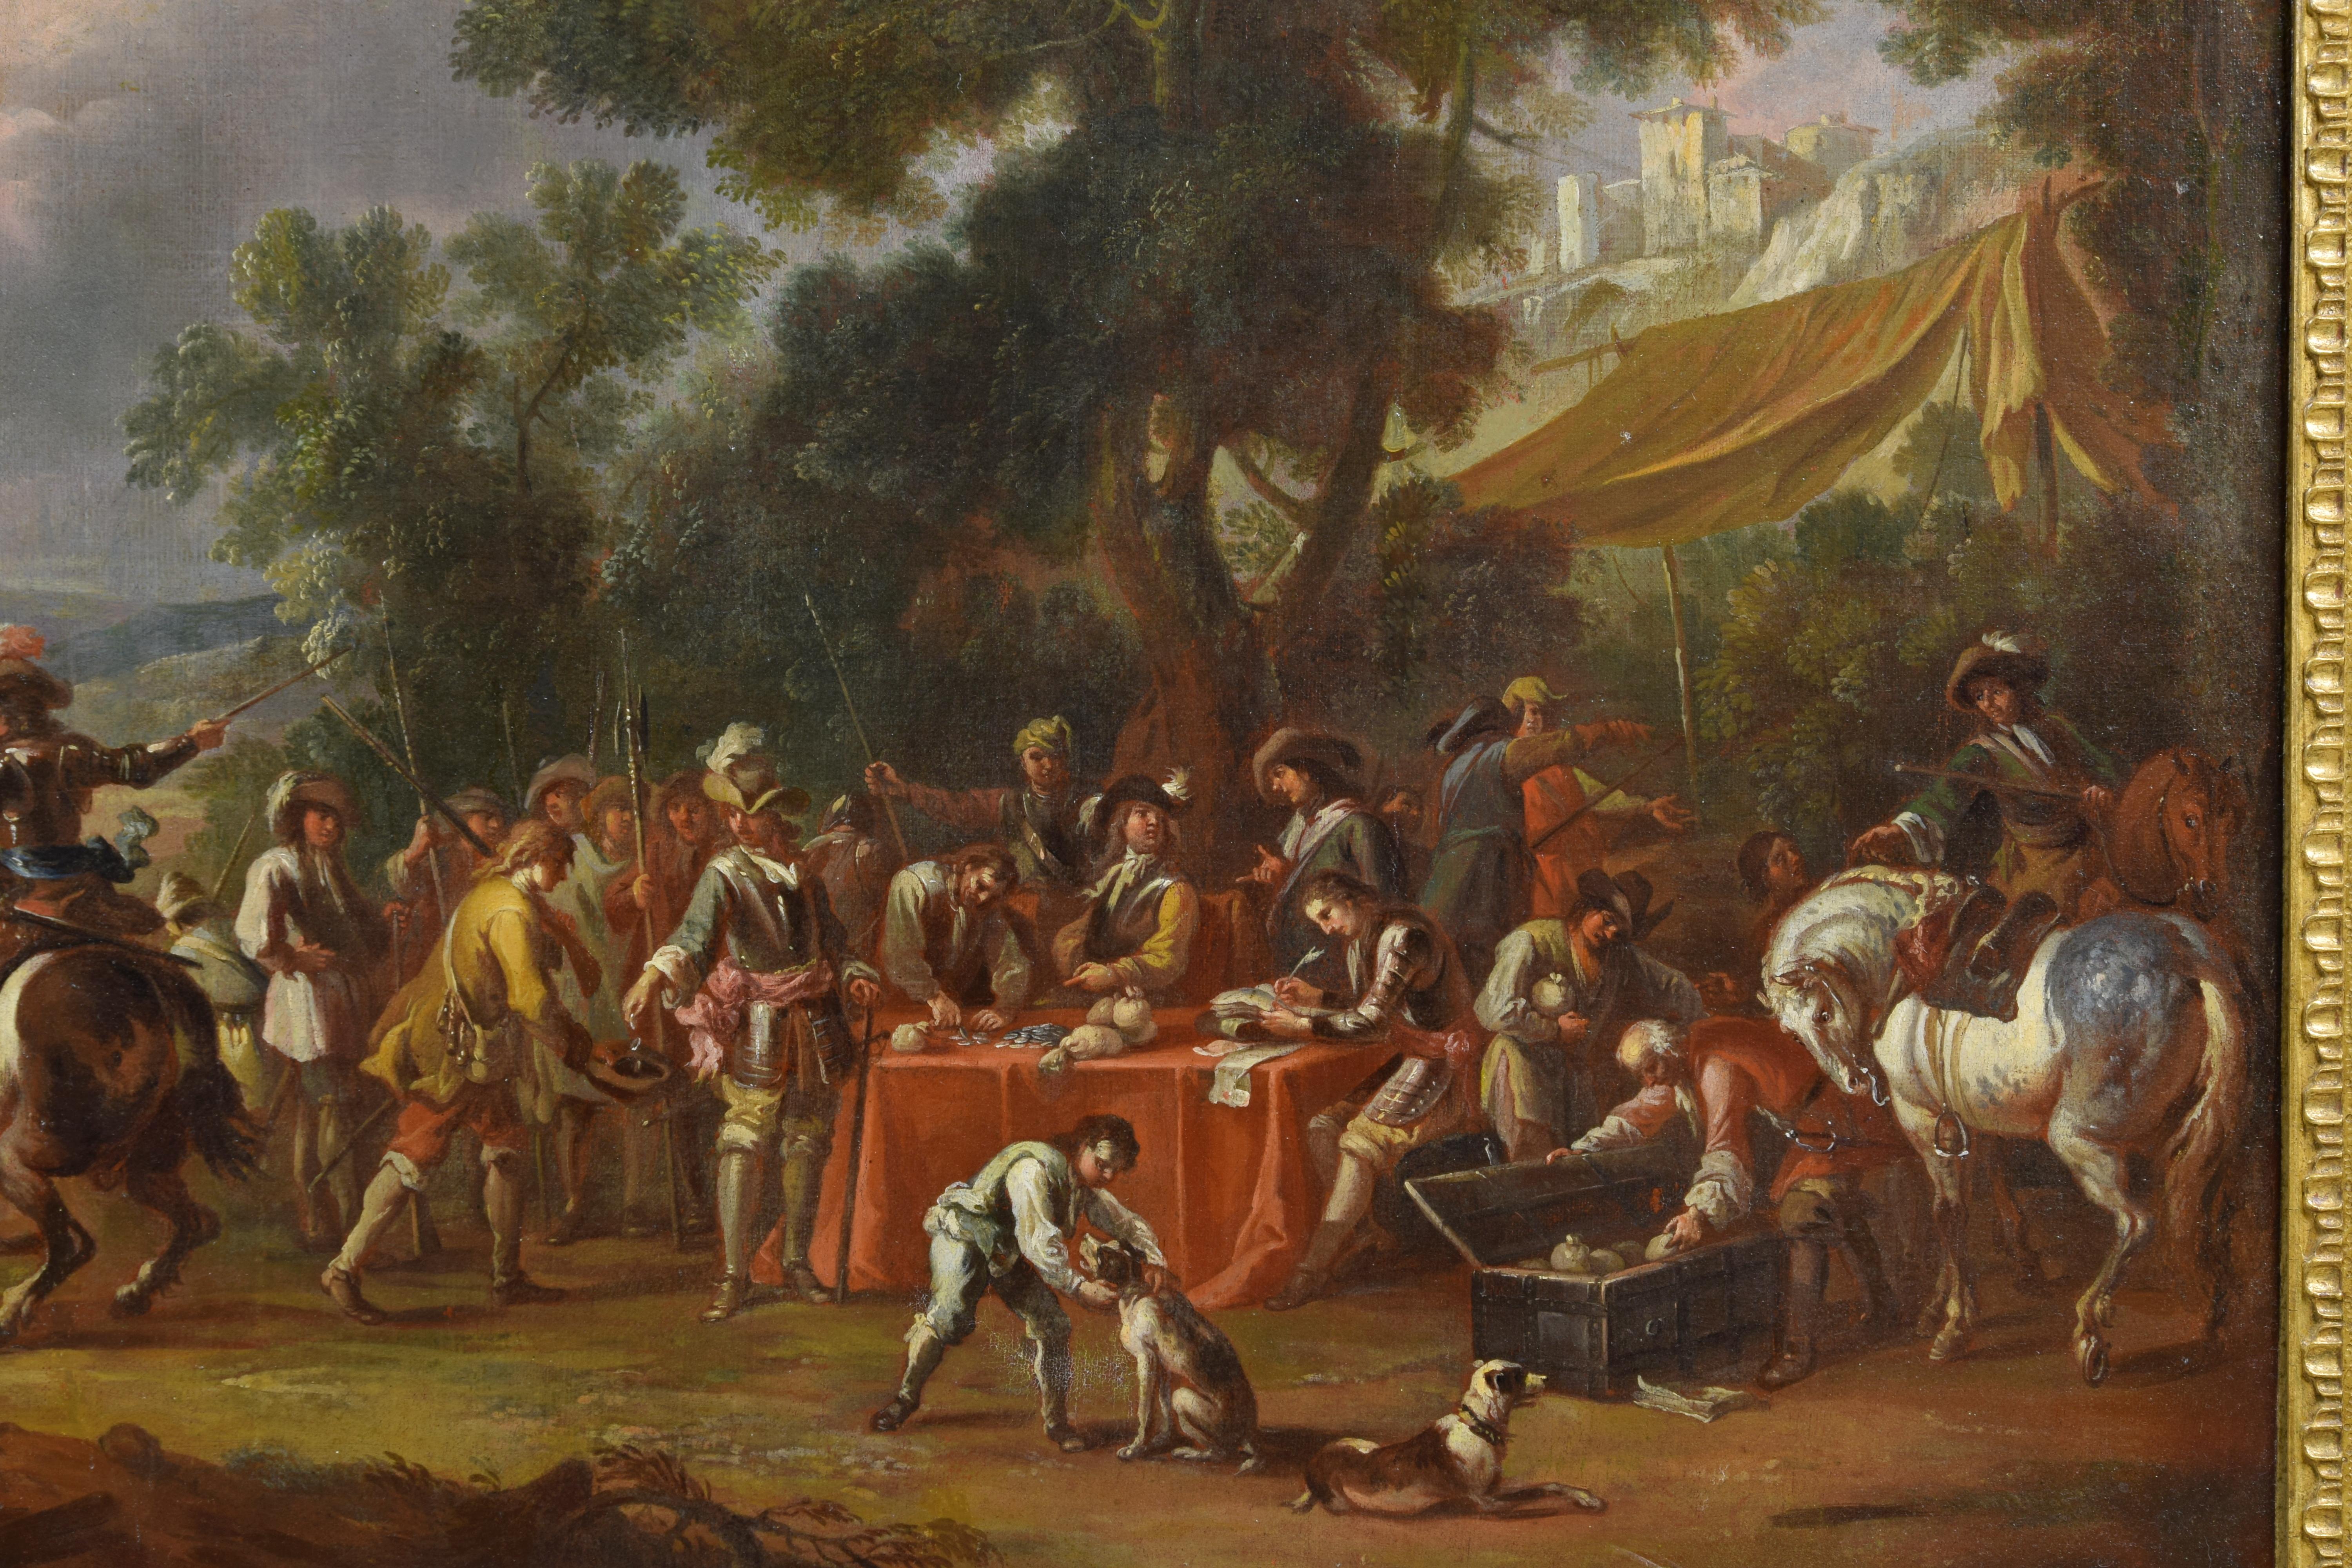 Hand-Painted 17th Century, Dutch Oil on Canvas Painting with the Pay of Soldiers